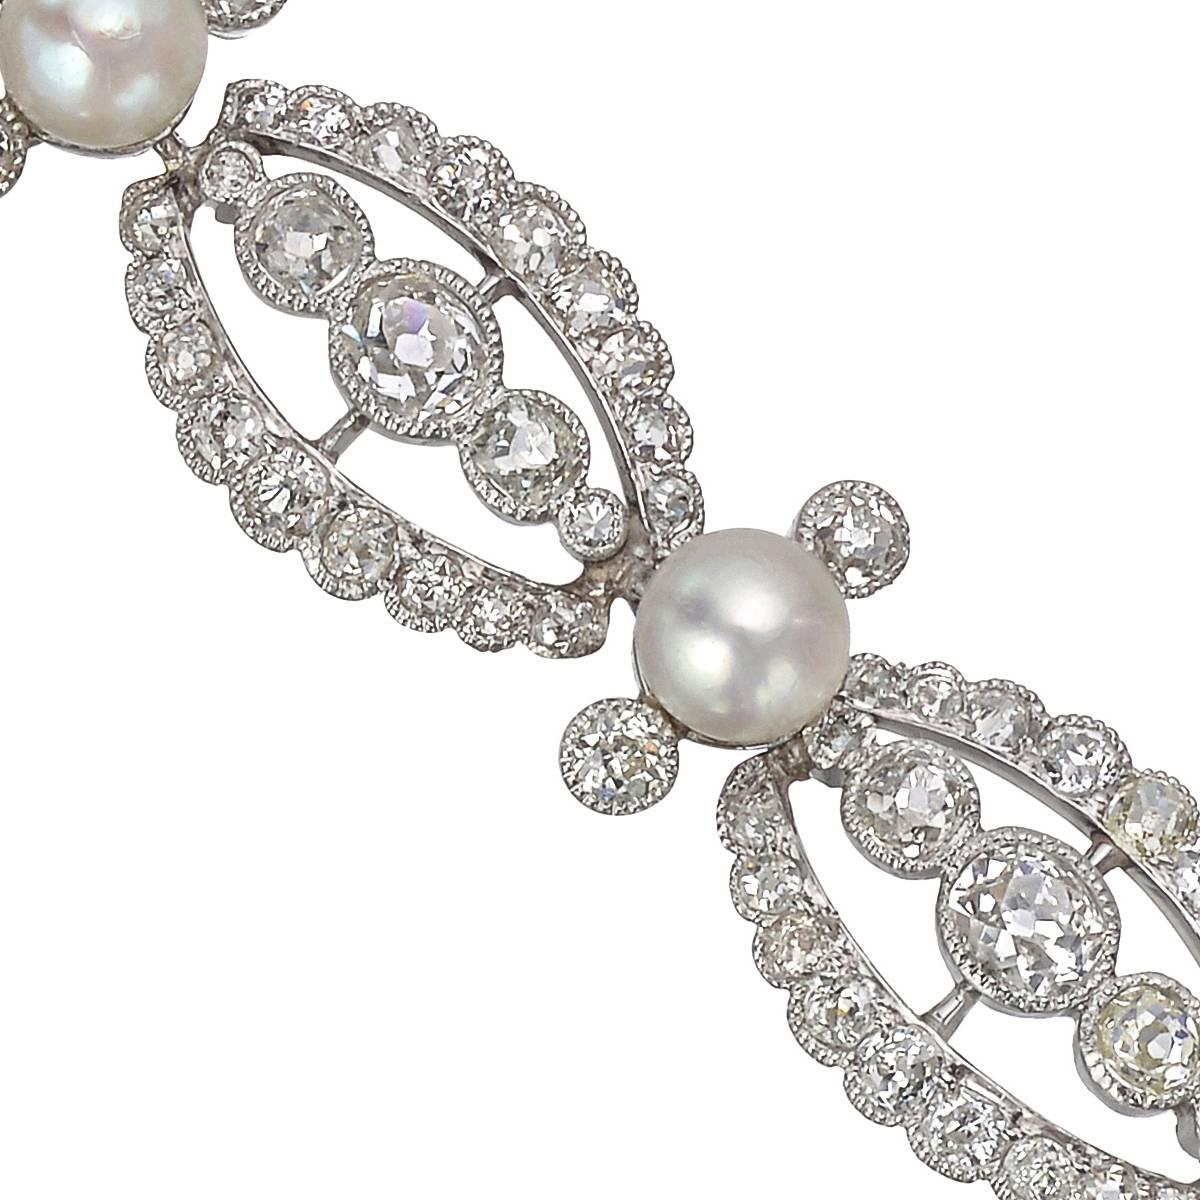 Fine antique link bracelet, featuring openwork old mine-cut diamond-set links separated by round pearls, in platinum, circa 1900. 184 diamonds weighing approximately 9.12 total carats. 7.25